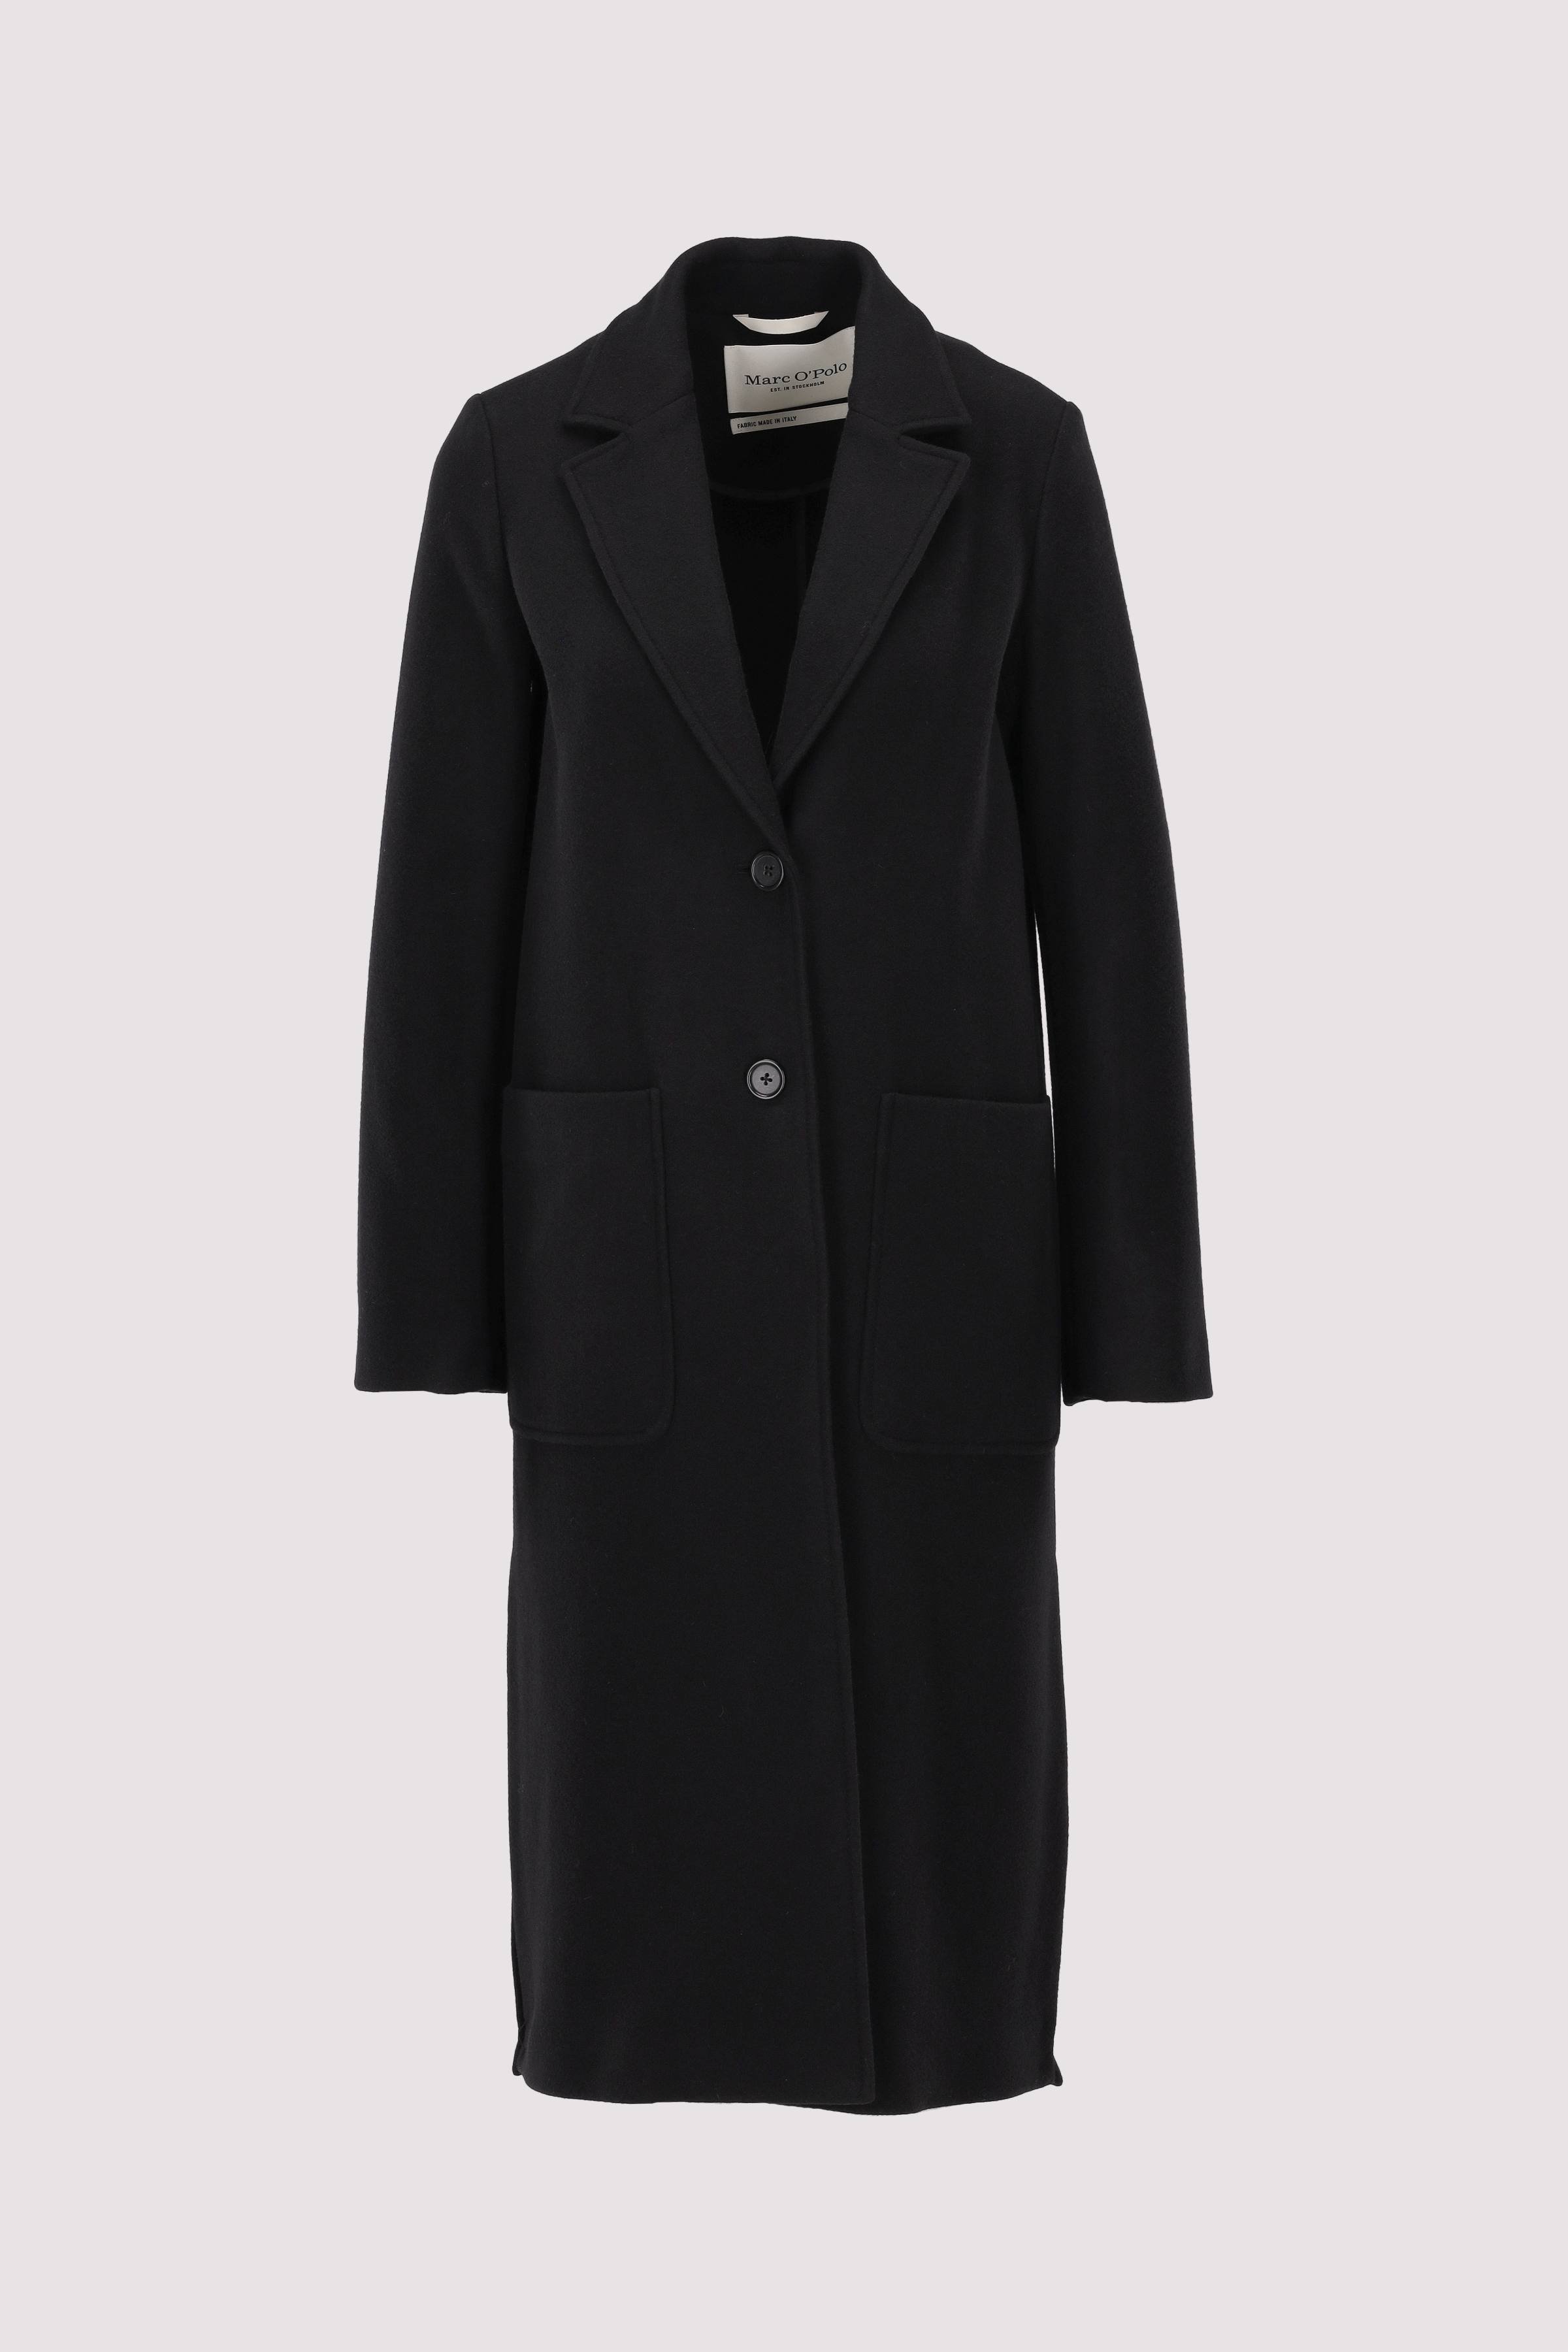 Coat, long, side slits, fitted